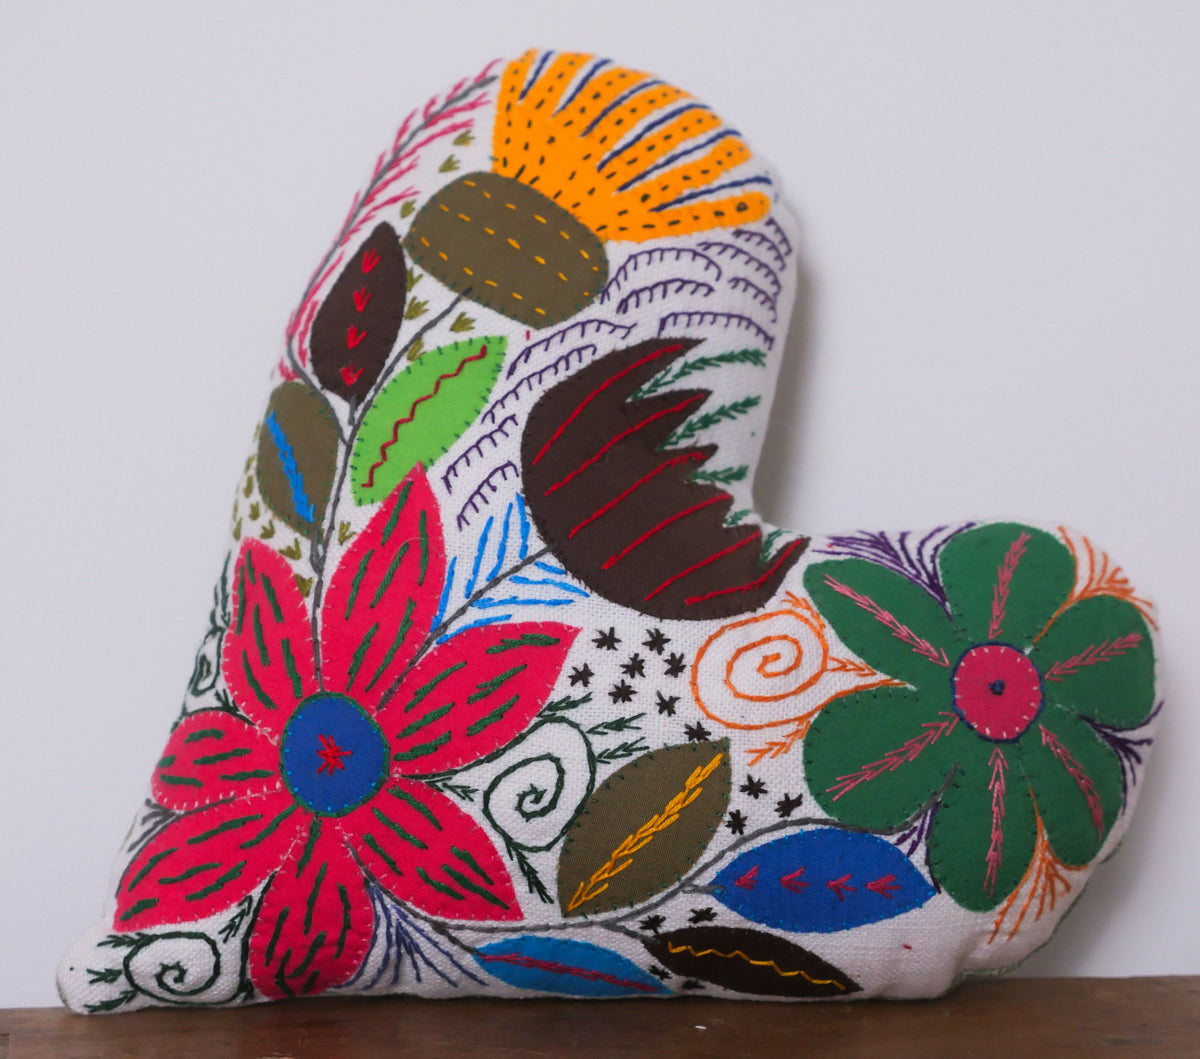 Heart shaped cushion, hand embroidered by a women's association in Cape Town.